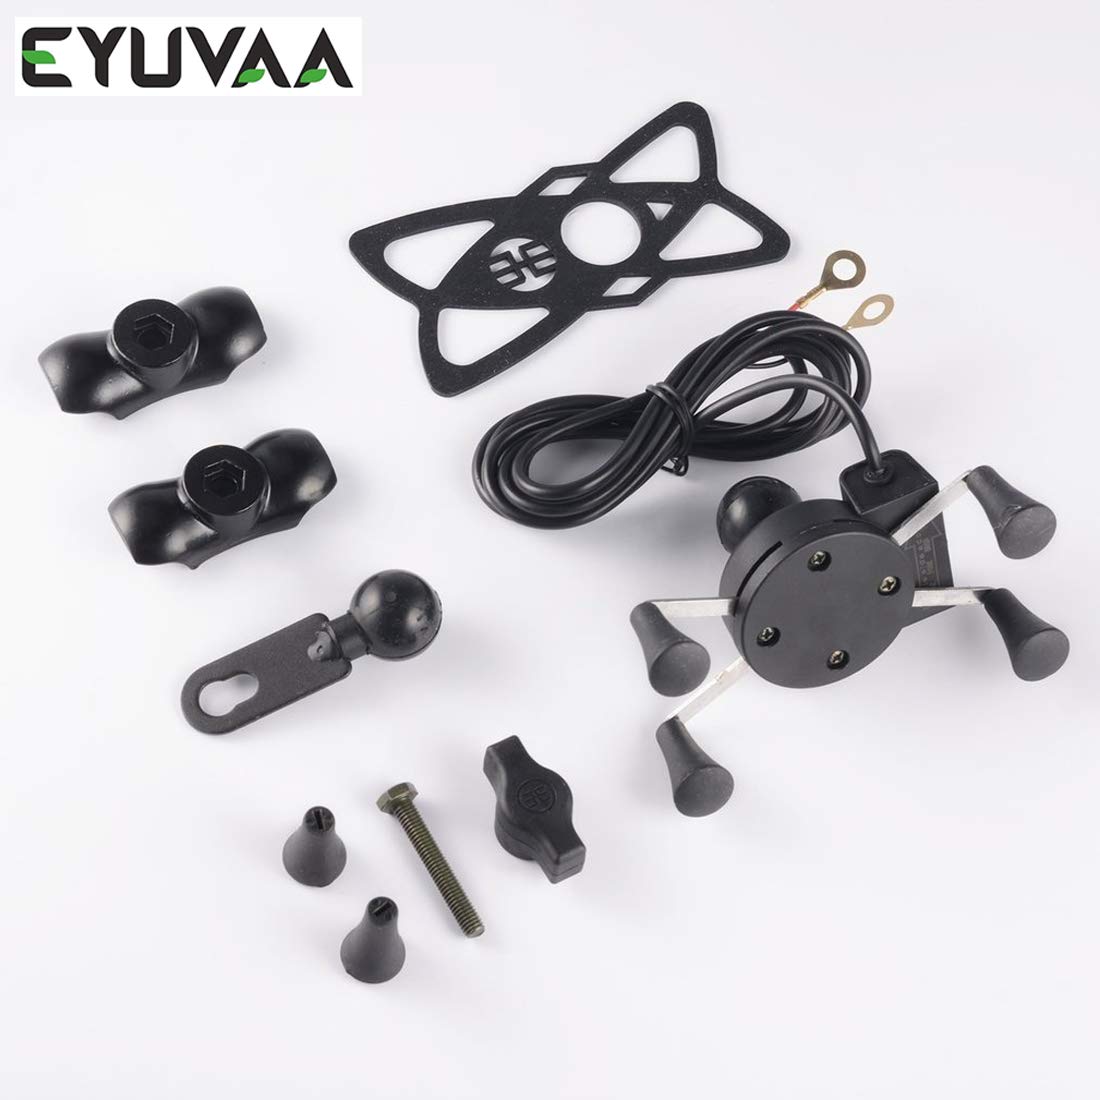 EYUVAA Spider Bike Mobile Holder with Charger - X Grip Spider Universal Motorcycle Car 360 Degree Rotating Bike Phone Holder with USB Charging for All Smartphones (Black)